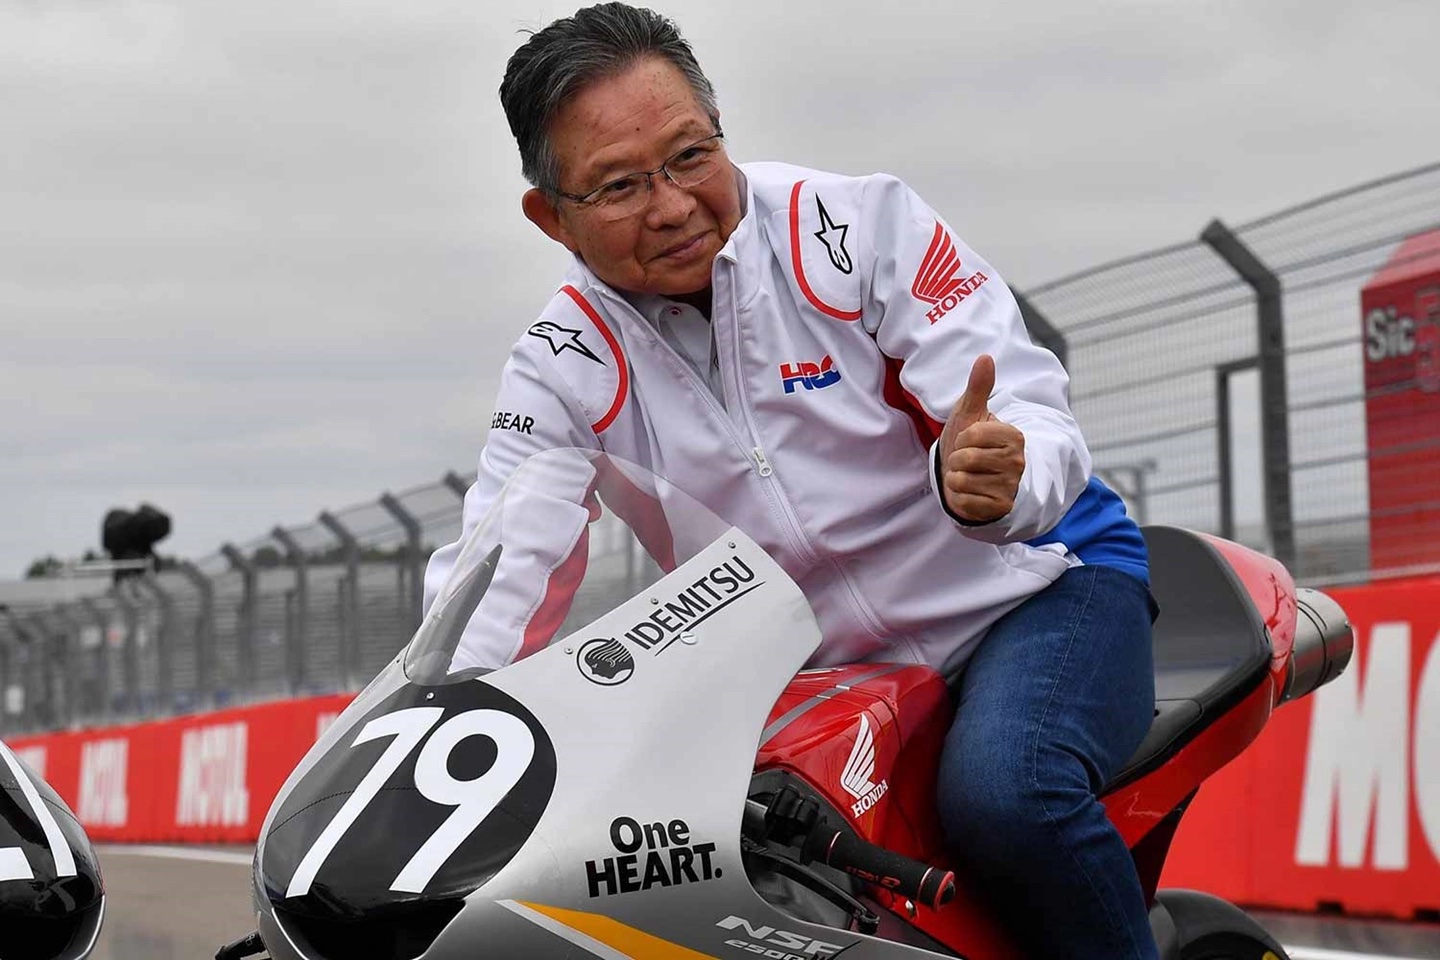 A view of Kimitsu Takahashi, racer for Honda and a brilliant legend in his own right. Takahashi passed away on March 16th of this year, survived by his brilliant legacy.